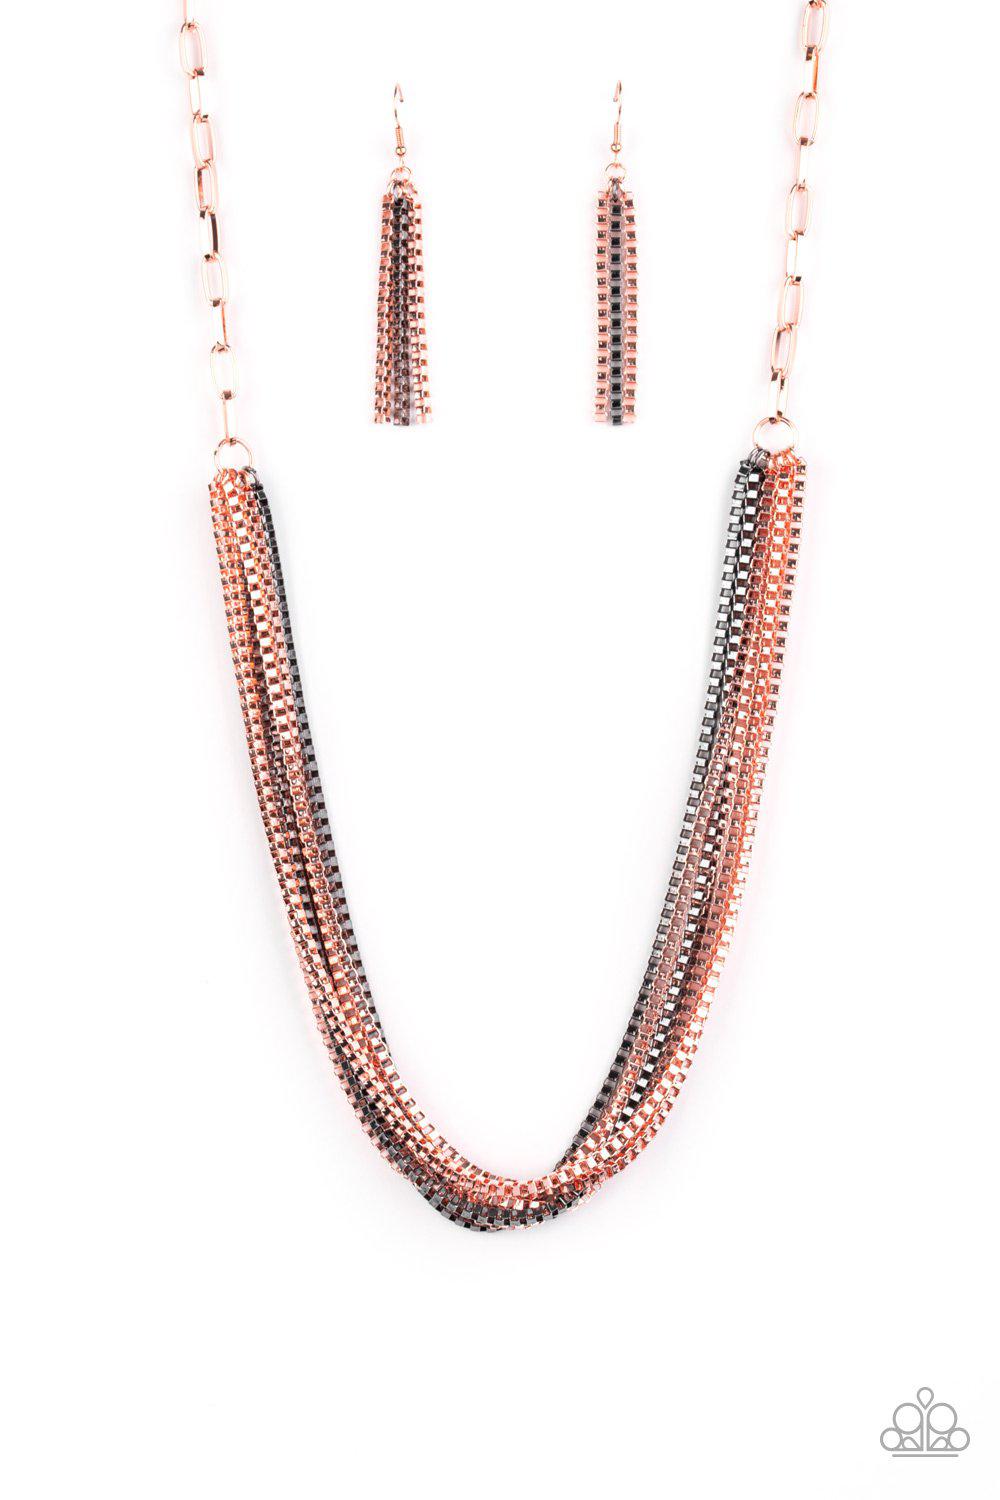 Beat Box Queen Copper and Gunmetal Necklace - Paparazzi Accessories - lightbox -CarasShop.com - $5 Jewelry by Cara Jewels